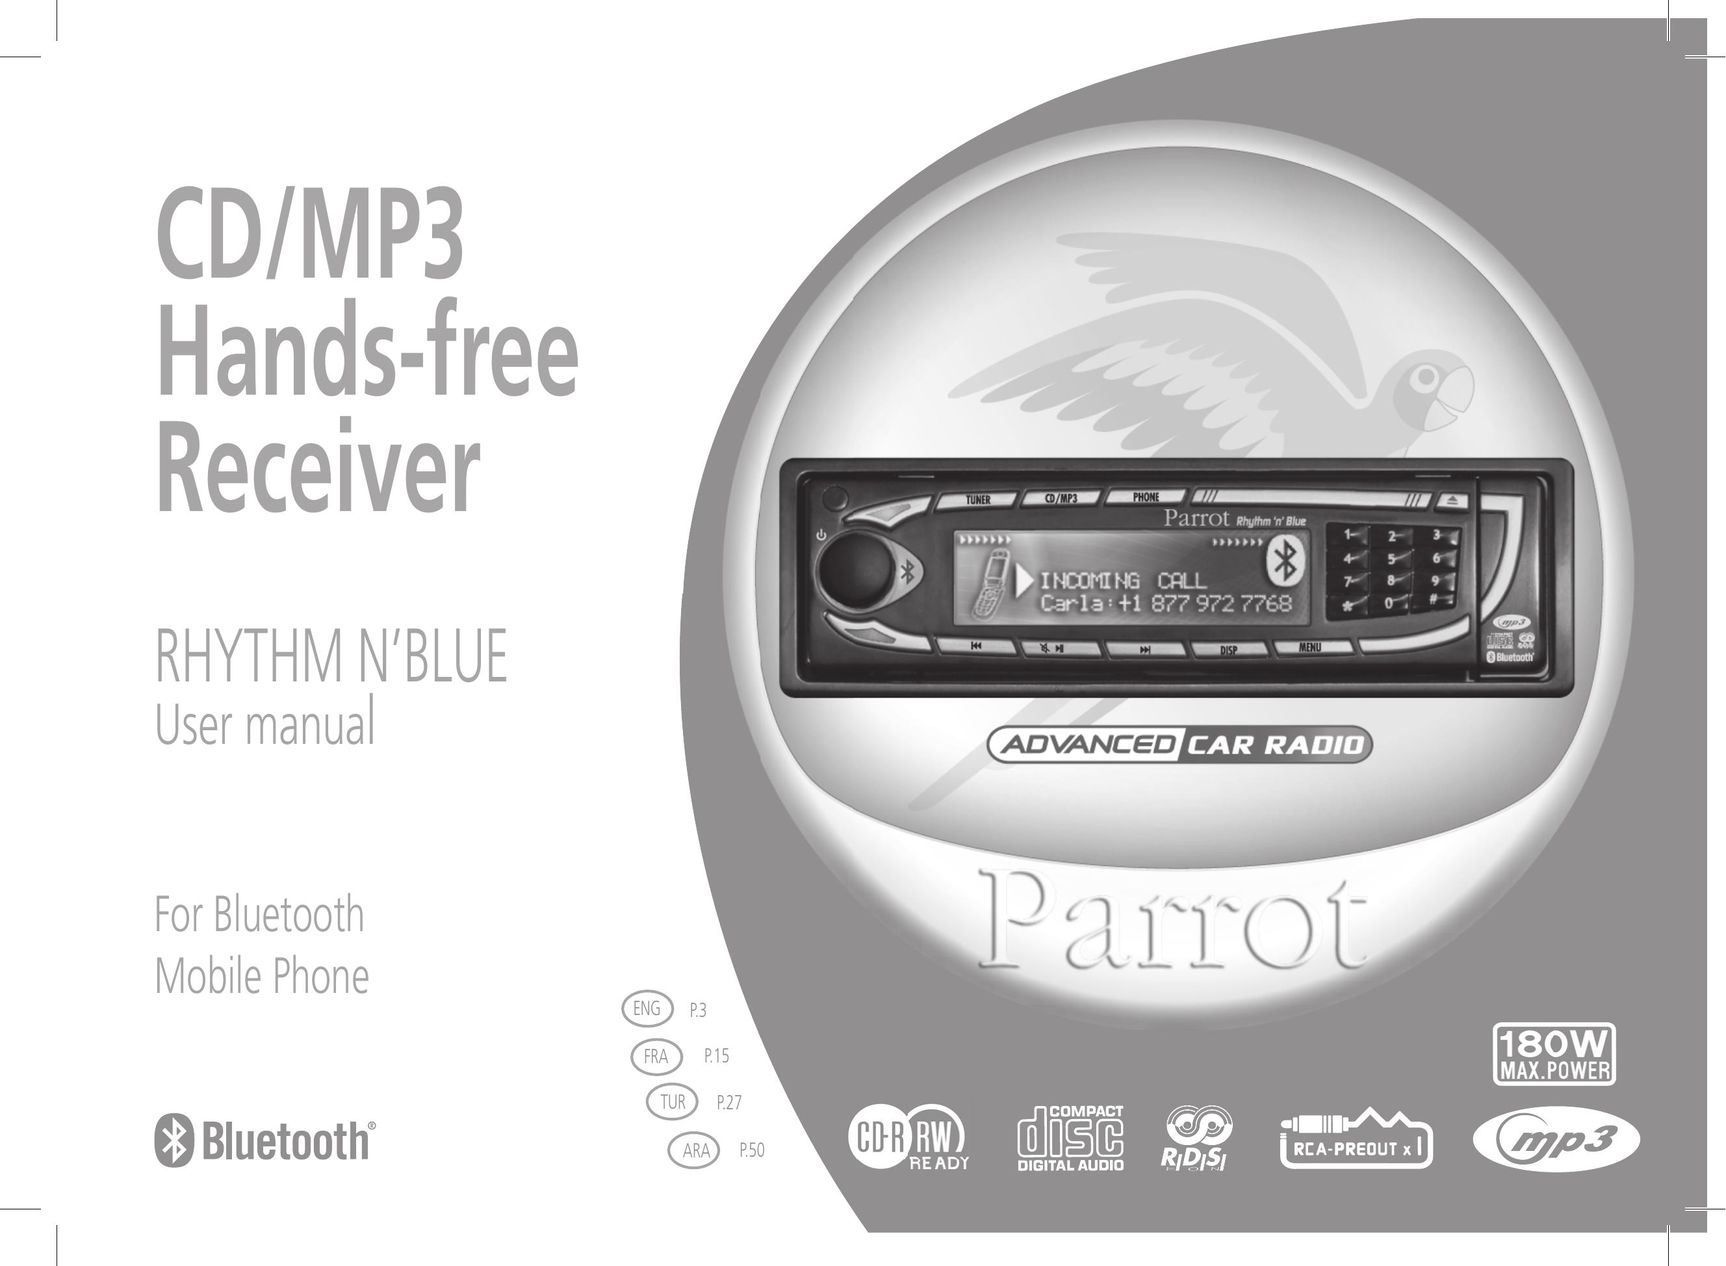 Parrot CD/MP3 Hands-free Receiver RHYTHM N' BLUE Car Stereo System User Manual